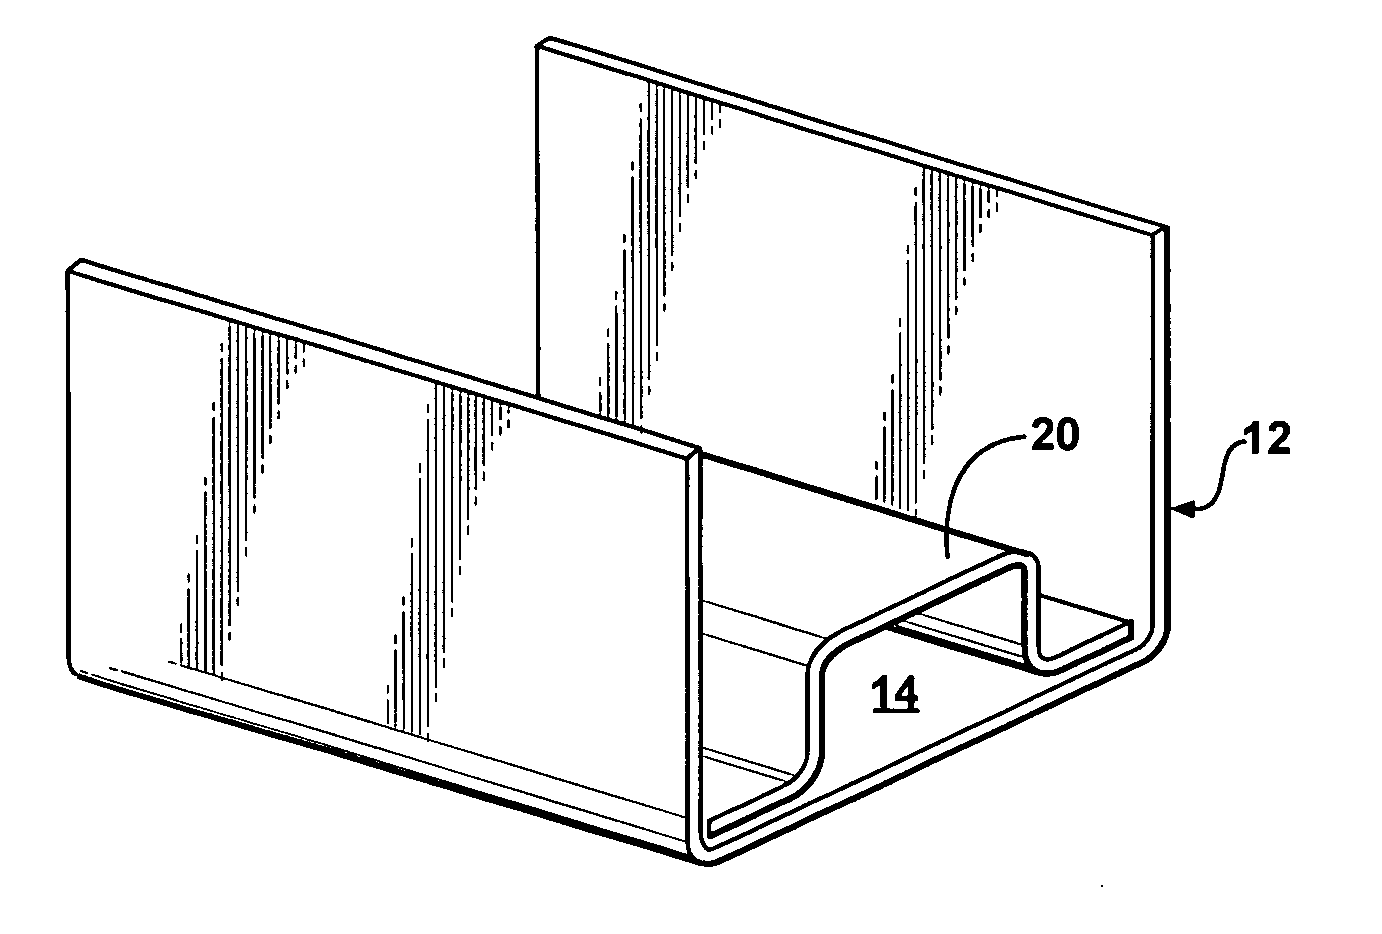 Method for manufacturing a reinforced structural component, and article manufactured thereby